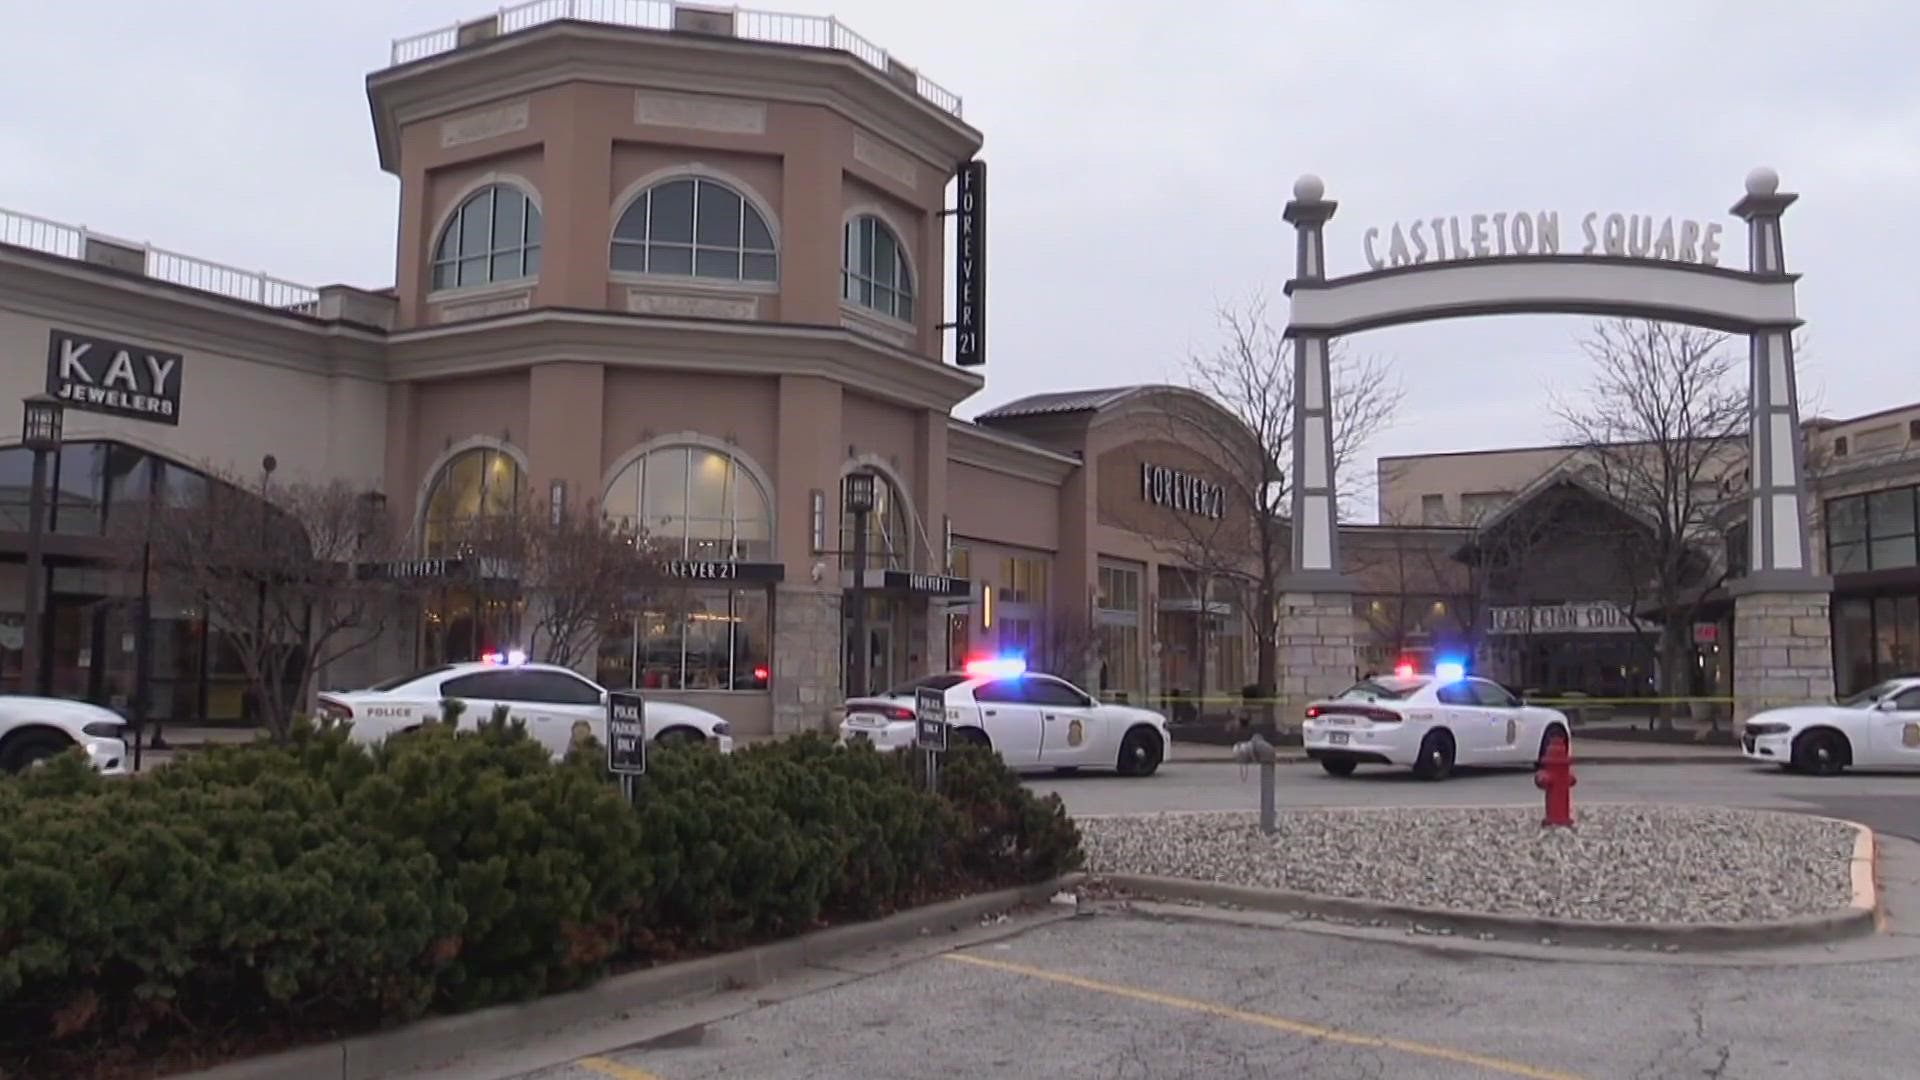 Hoosiers are growing more concerned about their safety in public places like shopping malls.